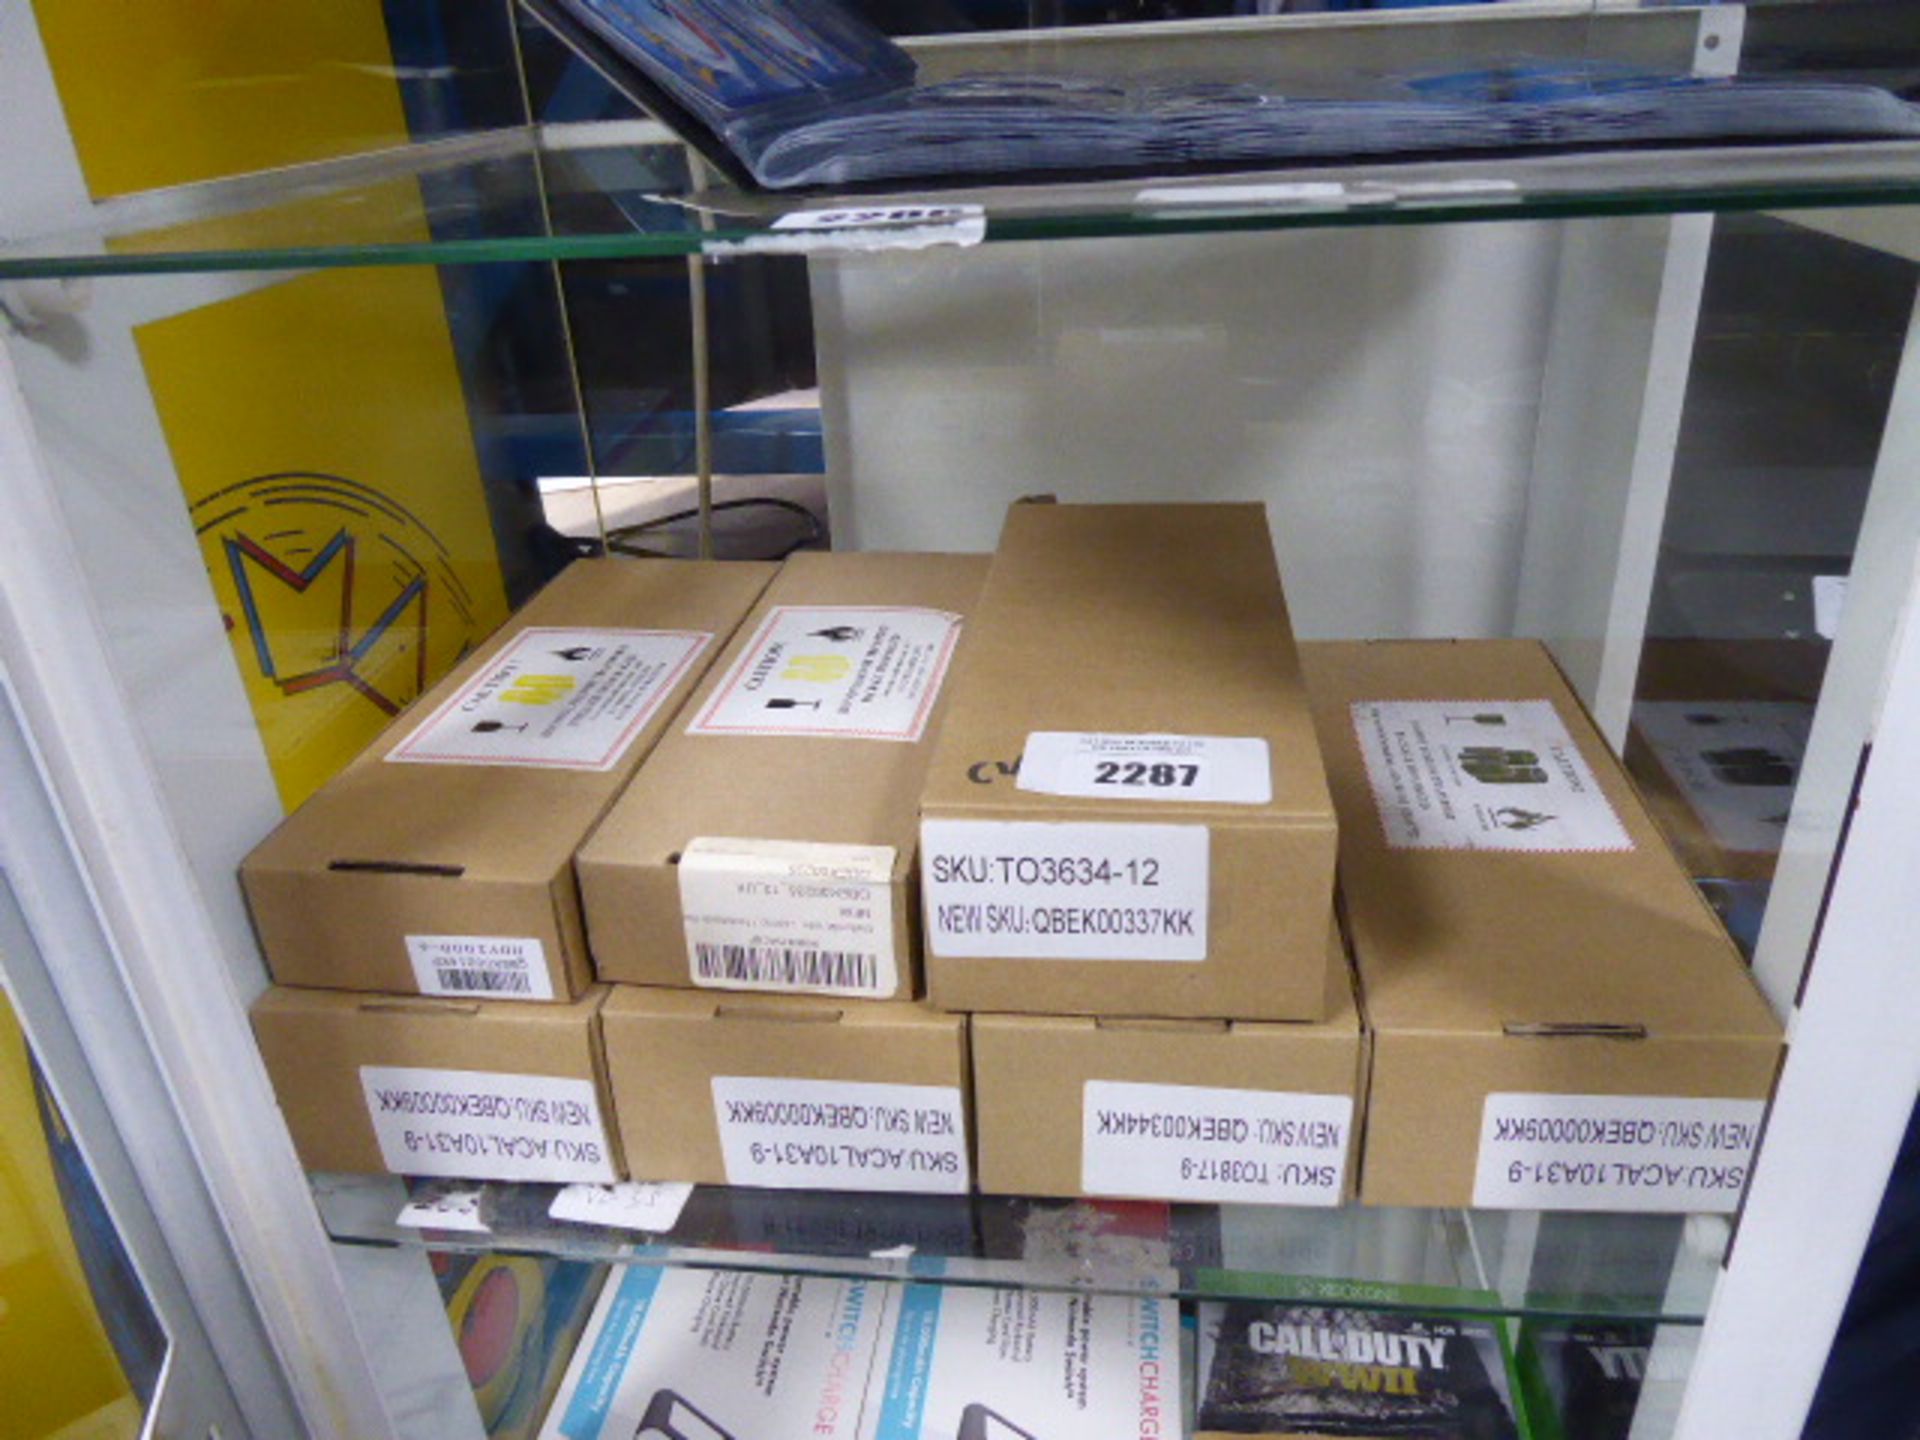 7 replacement laptop batteries in boxes